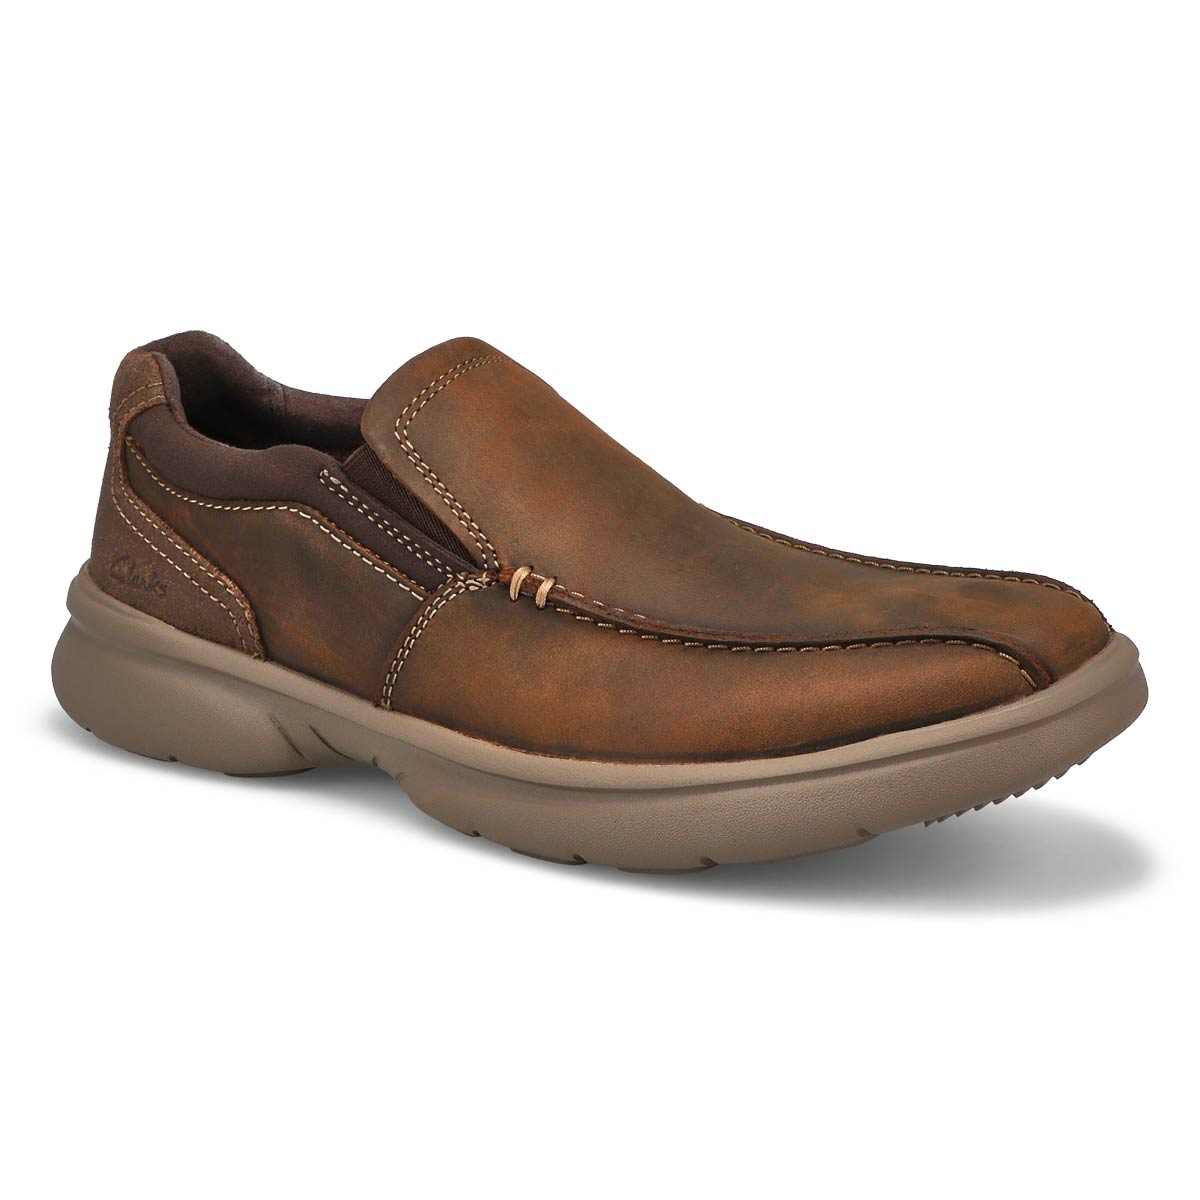 Men's Bradley Step Casual Slip On Loafer - Beeswax